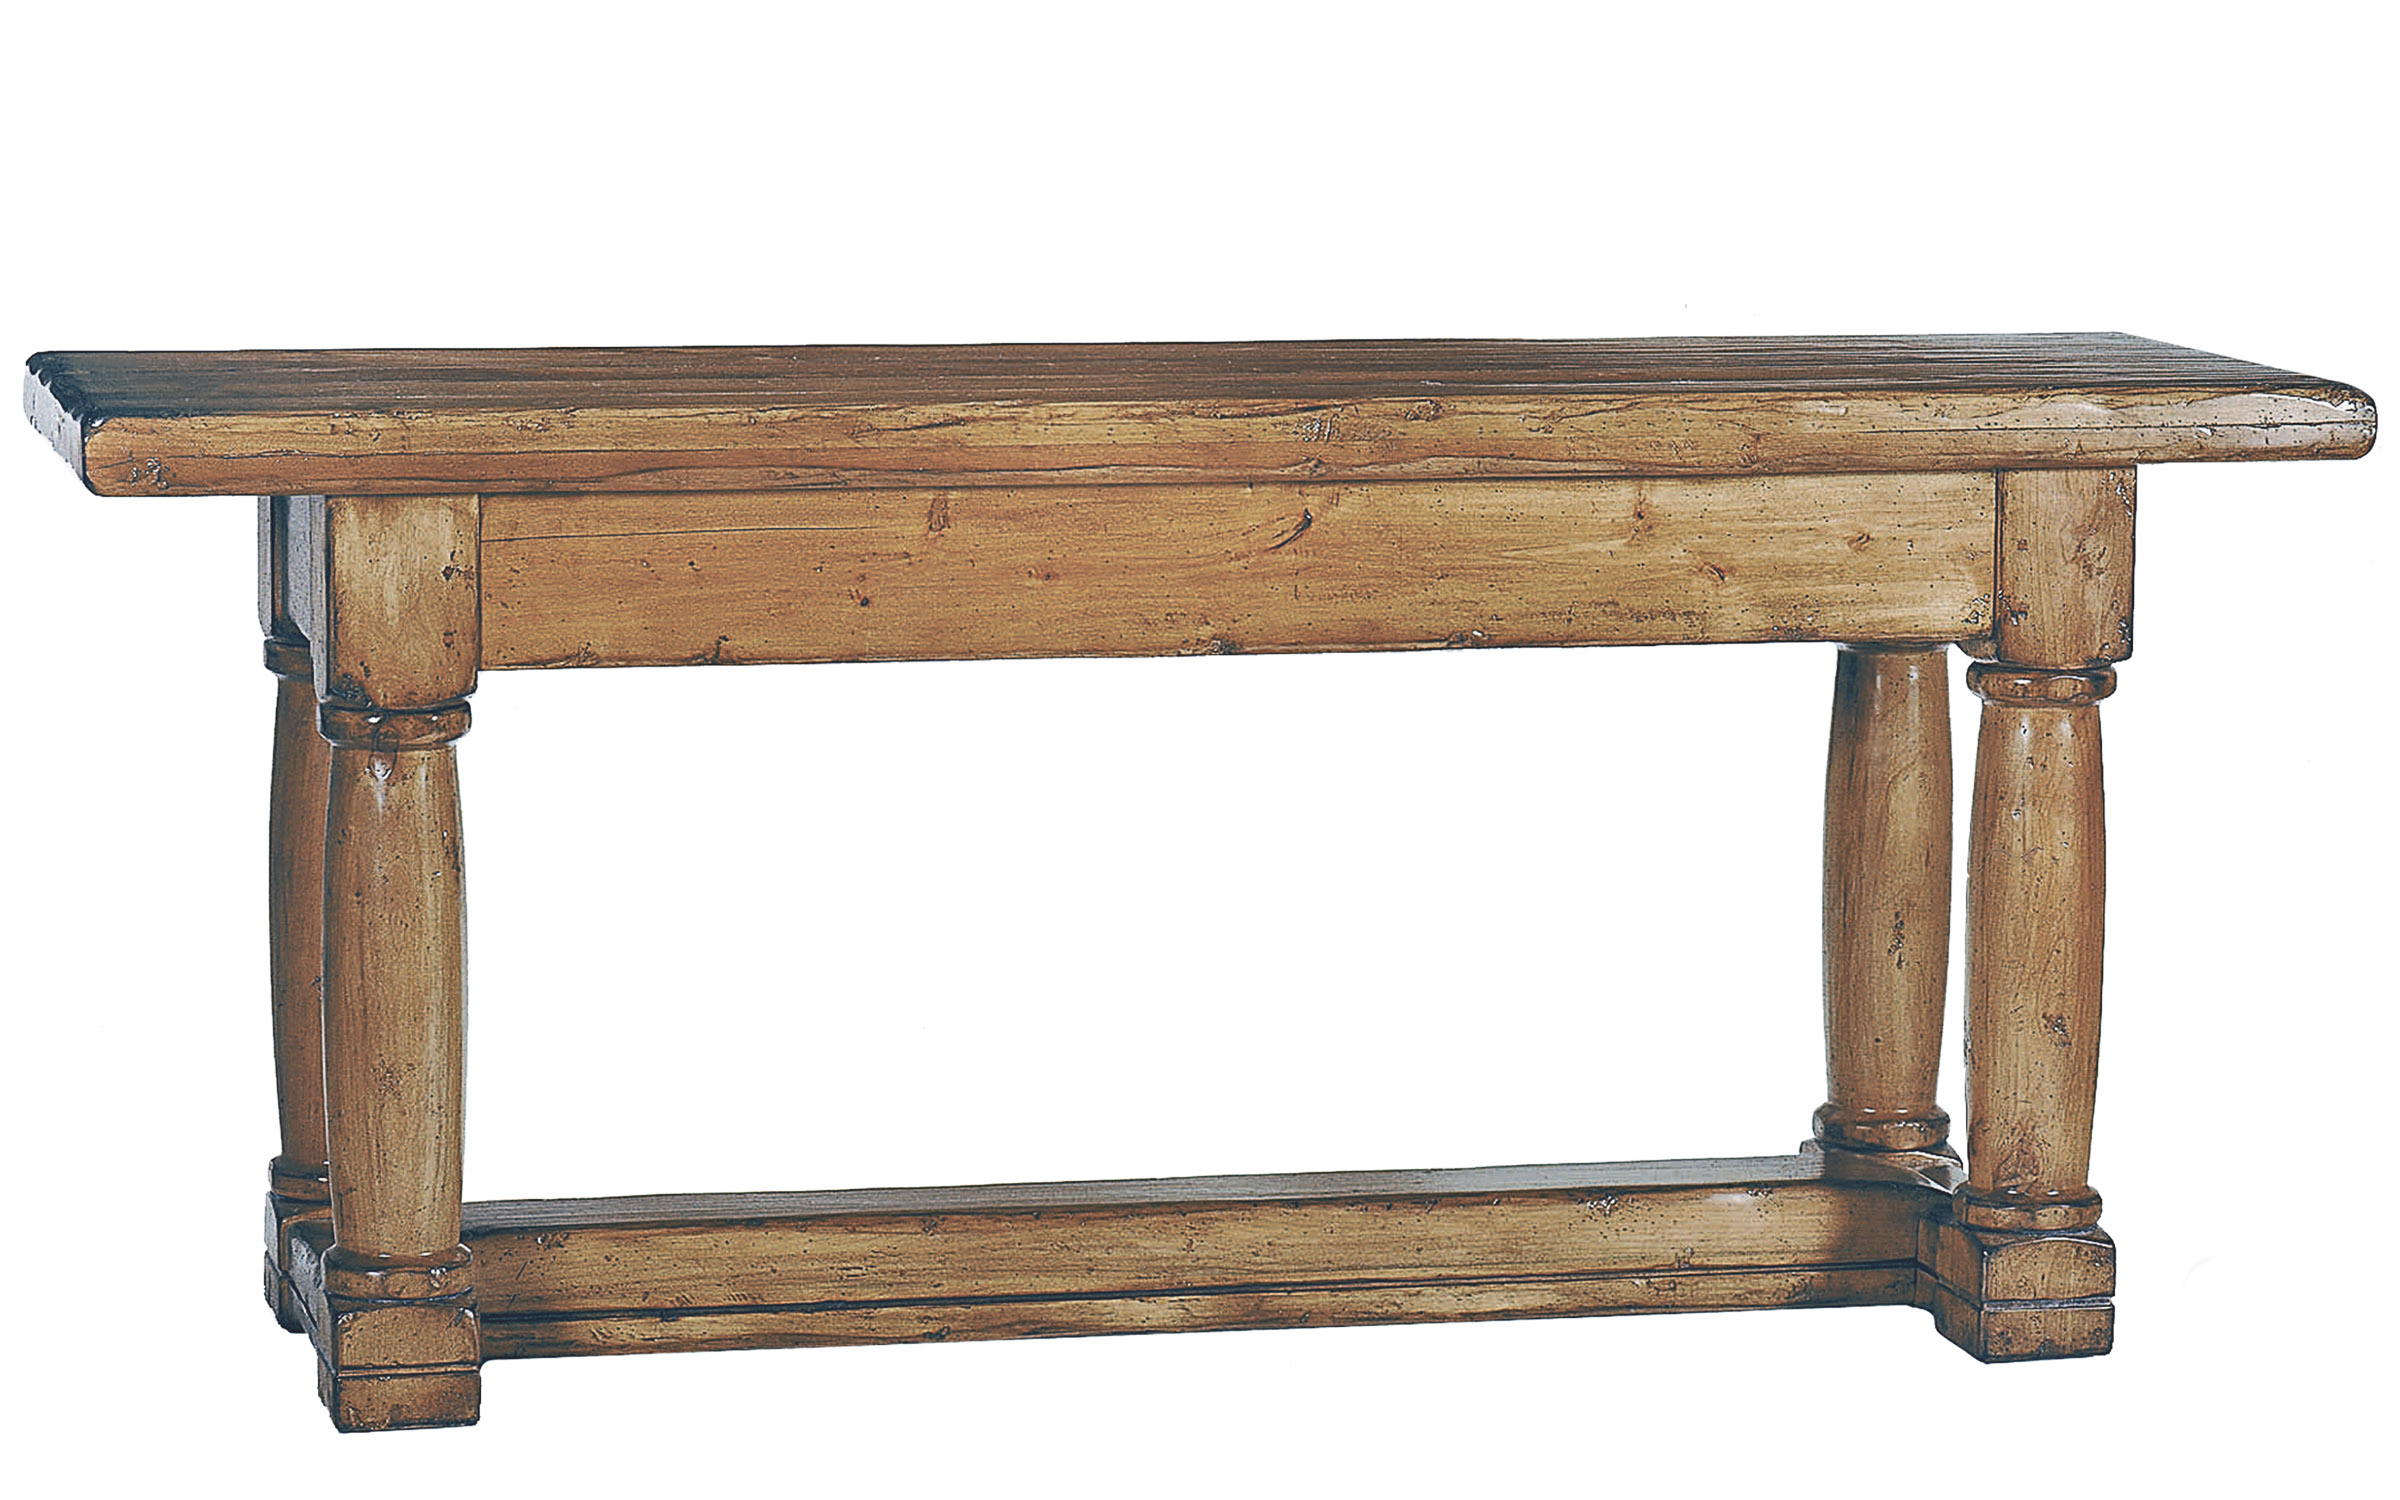 Gilbert traditional rustic console sofa table in distressed stained finish by Woodland Furniture in Idaho Falls